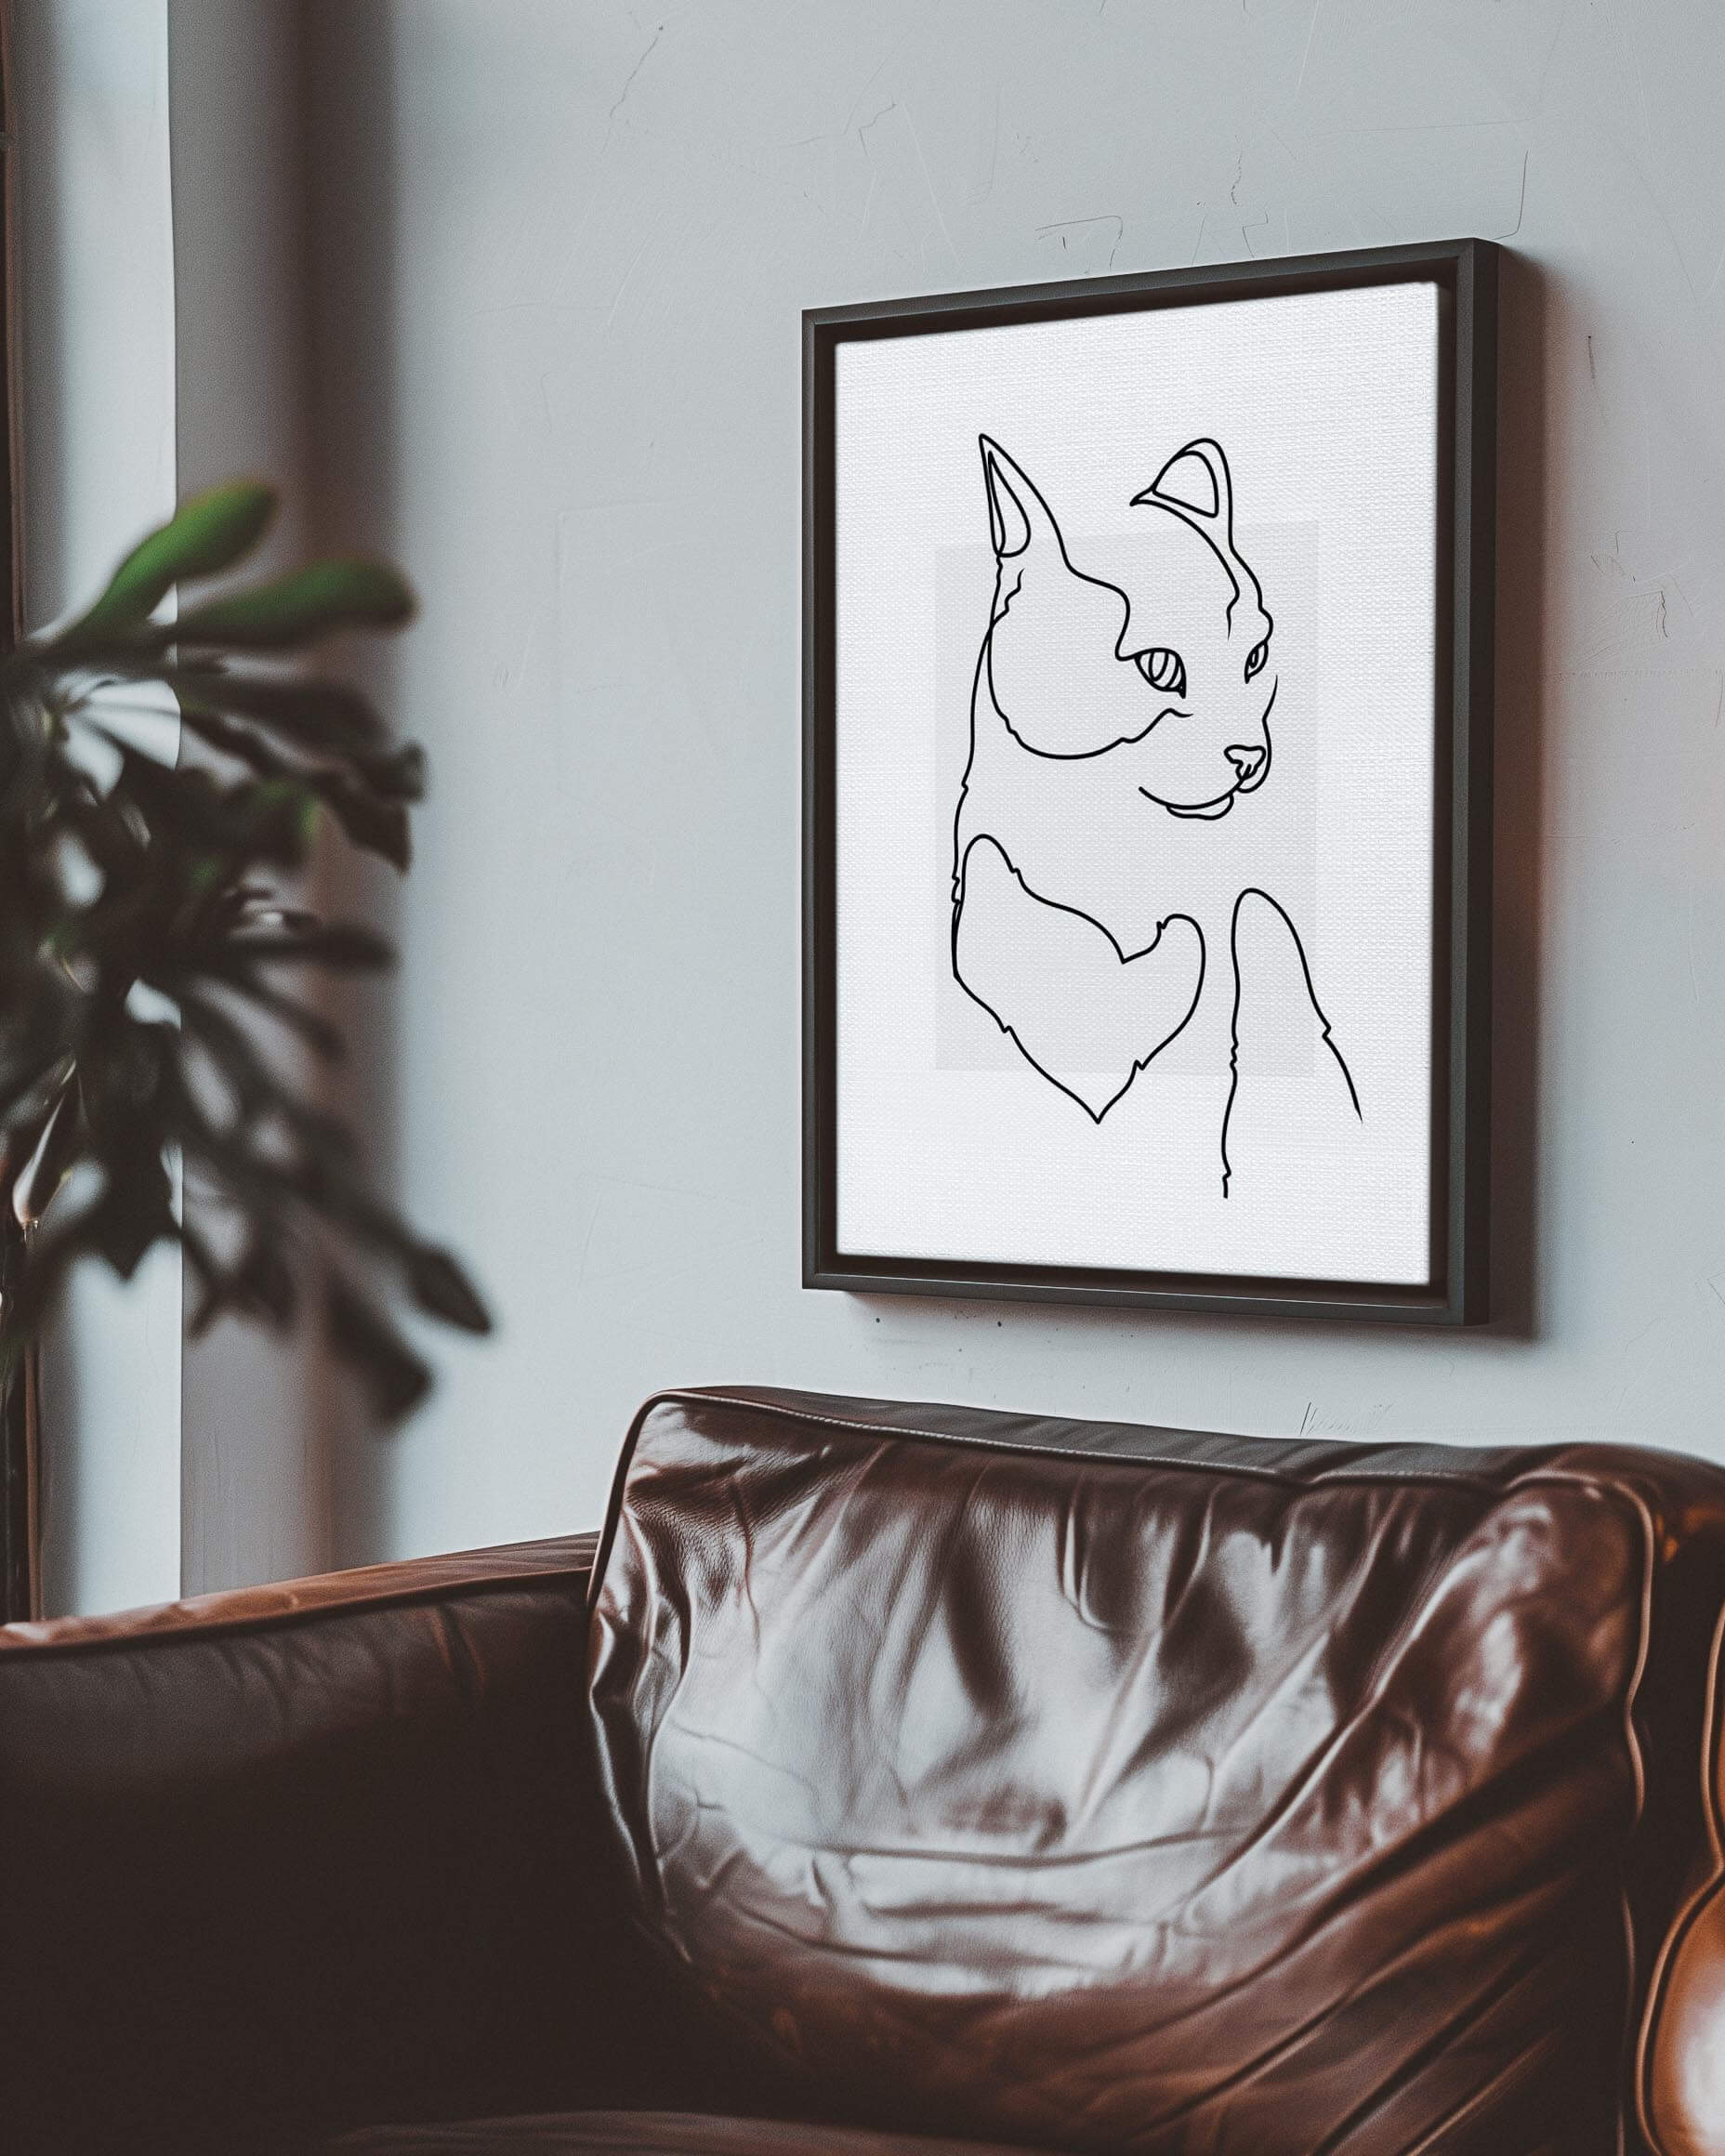 custom line drawn cat portrait printed on canvas and mounted in a unique home decor as a gift for a dog mom or dog dad pet parent made by vogue paws who specialize in personalized pet portrait gifts